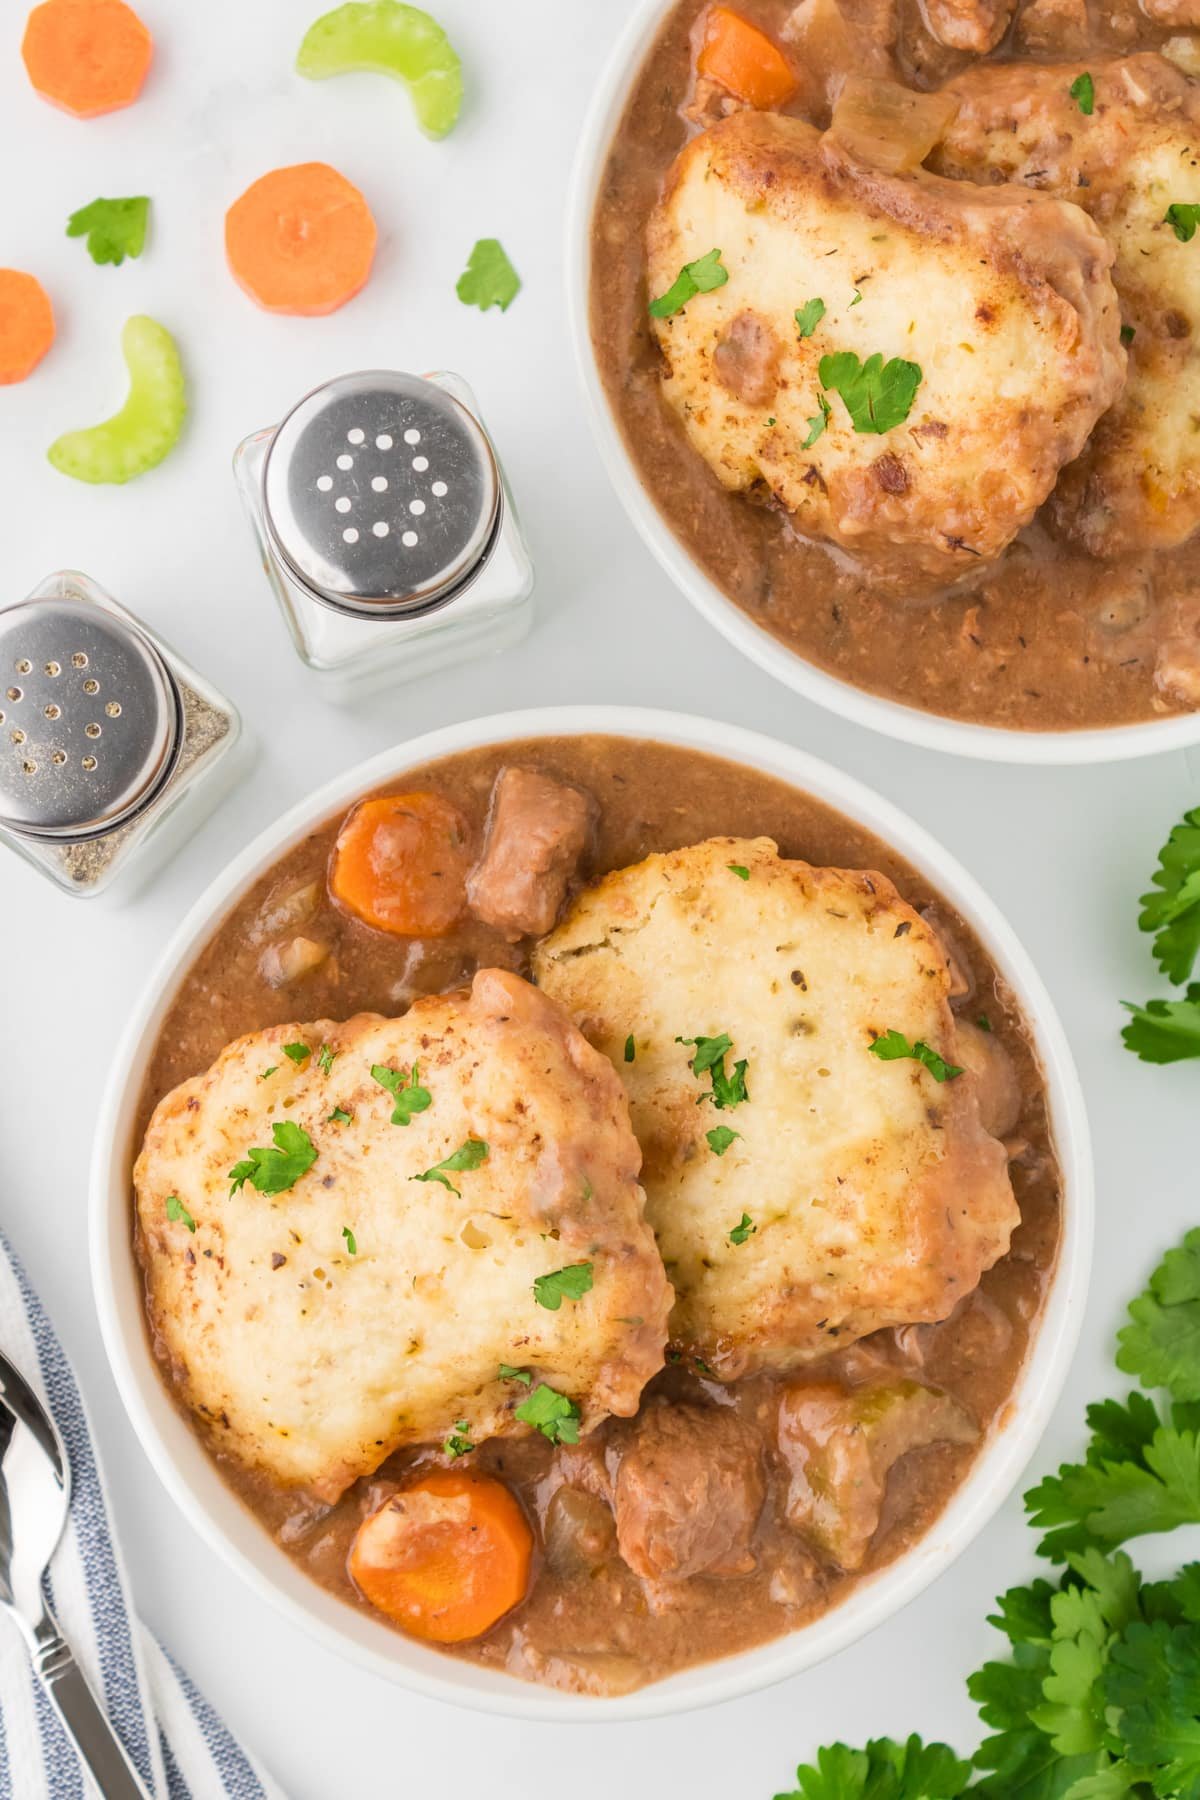 A bowl of beef stew topped with two dumplings, garnished with parsley.